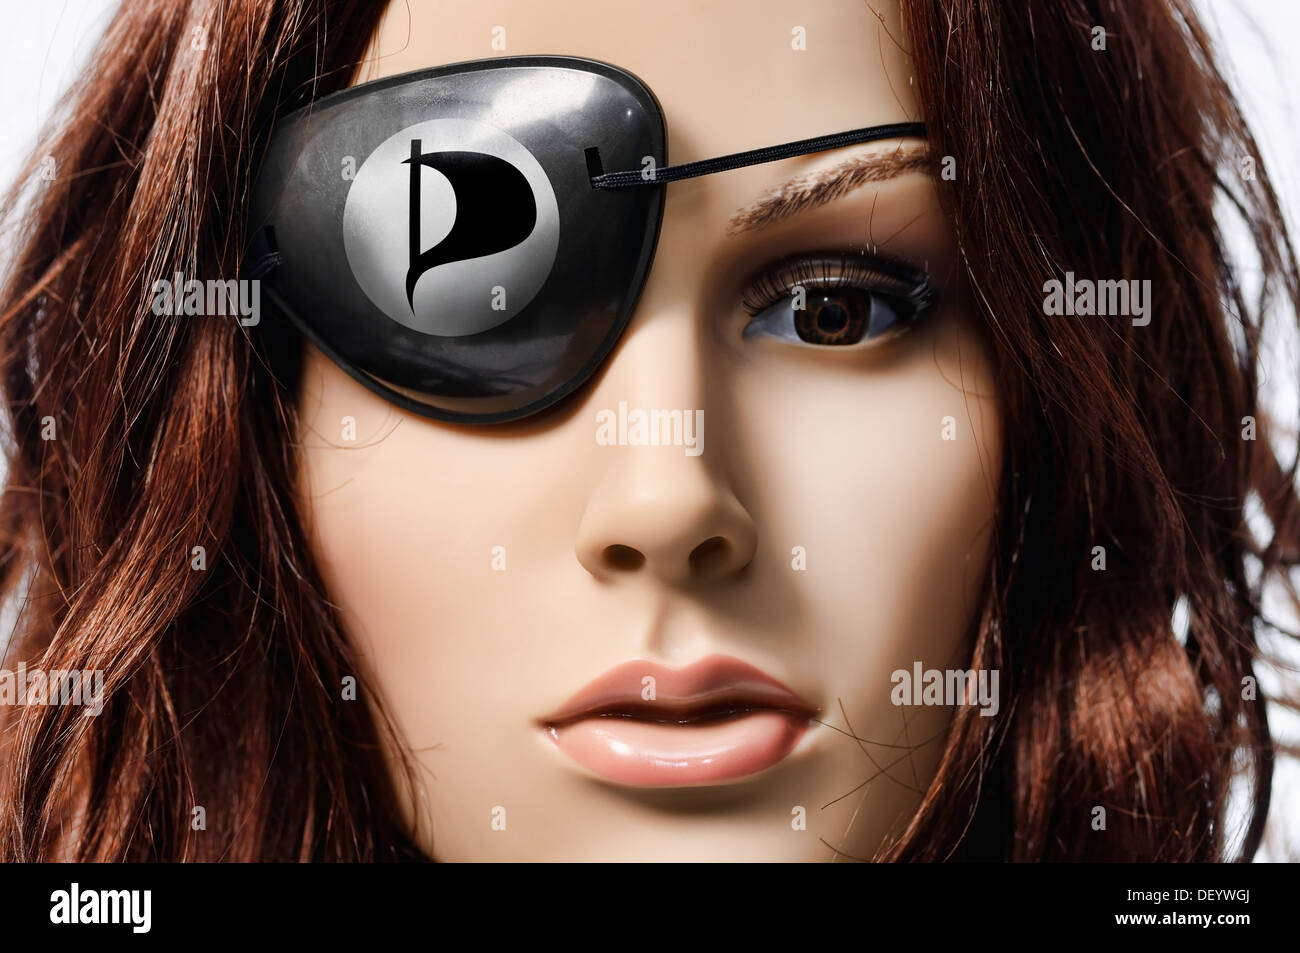 Shop-window mannequin wearing an eye patch with the logo of the Pirate Party of Germany Stock Photo